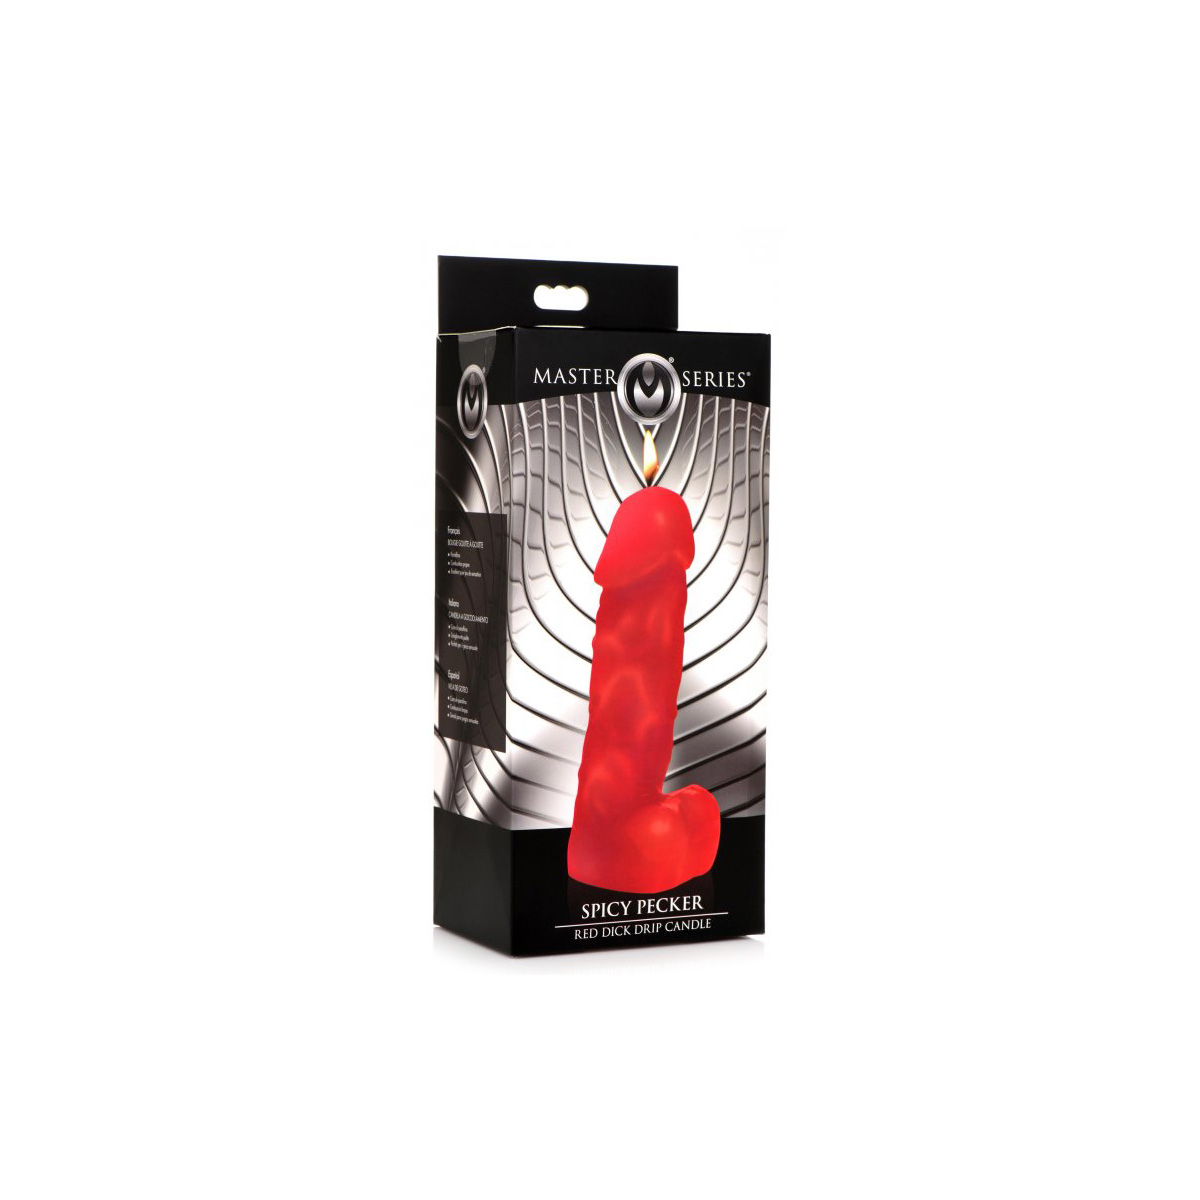 Spicy-Pecker-Red-Dick-Drip-Candle-118-XR-AG938-R-2